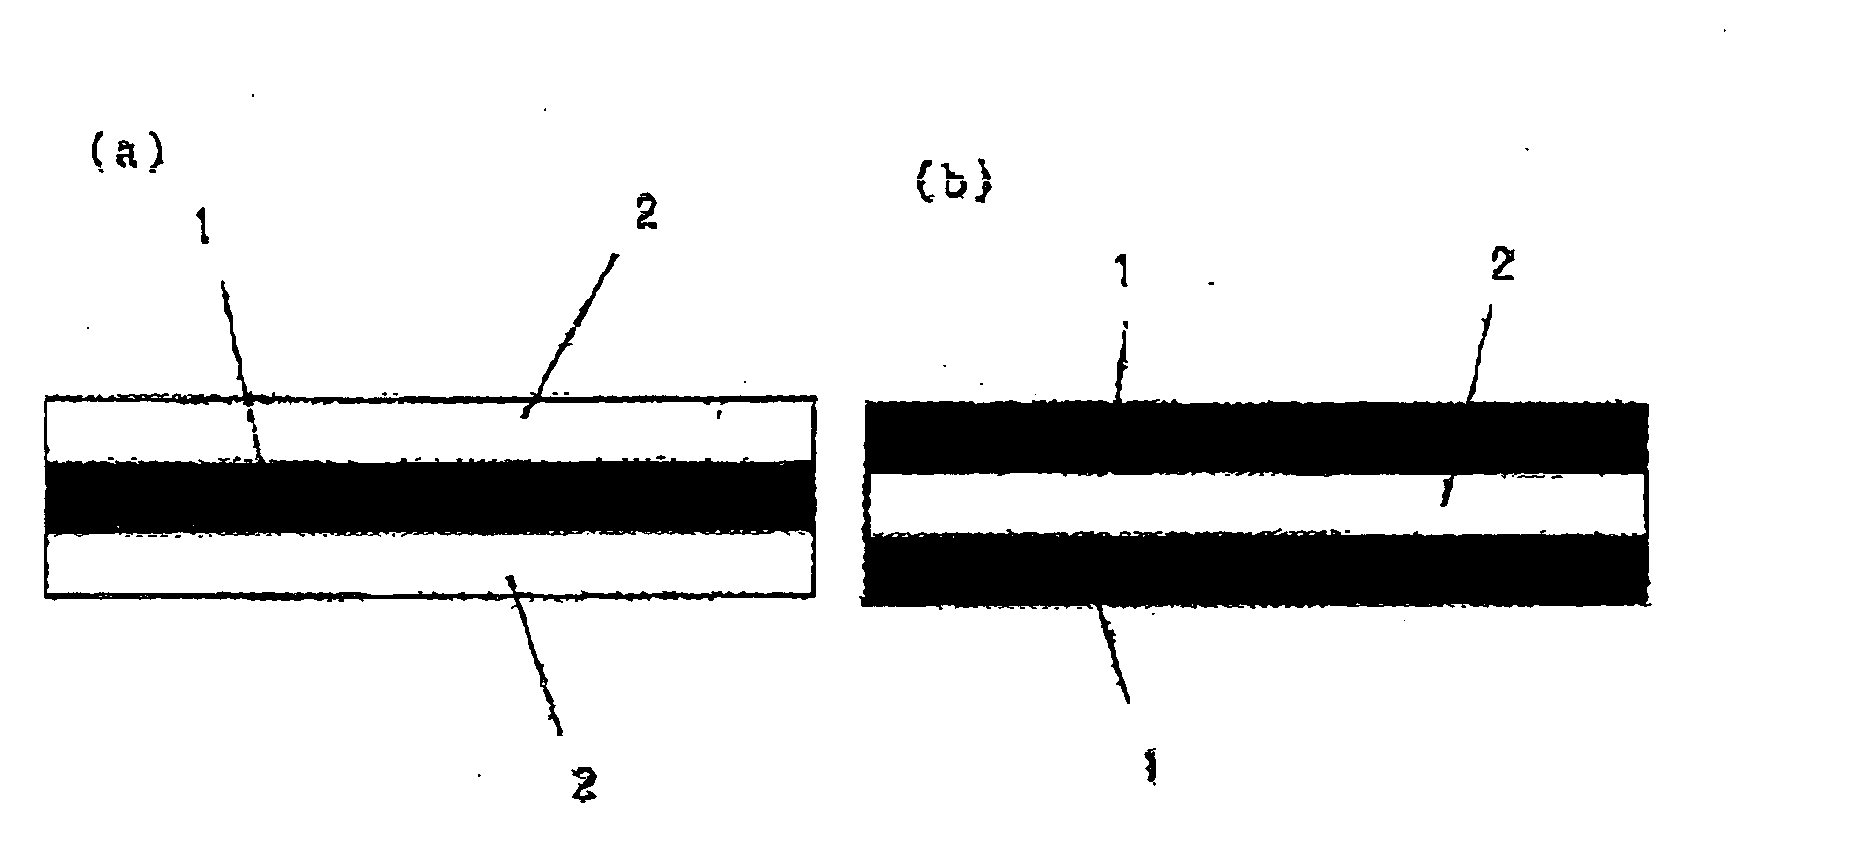 Transparent Conductive Carbon Nanotube Film and a Method for Producing the Same